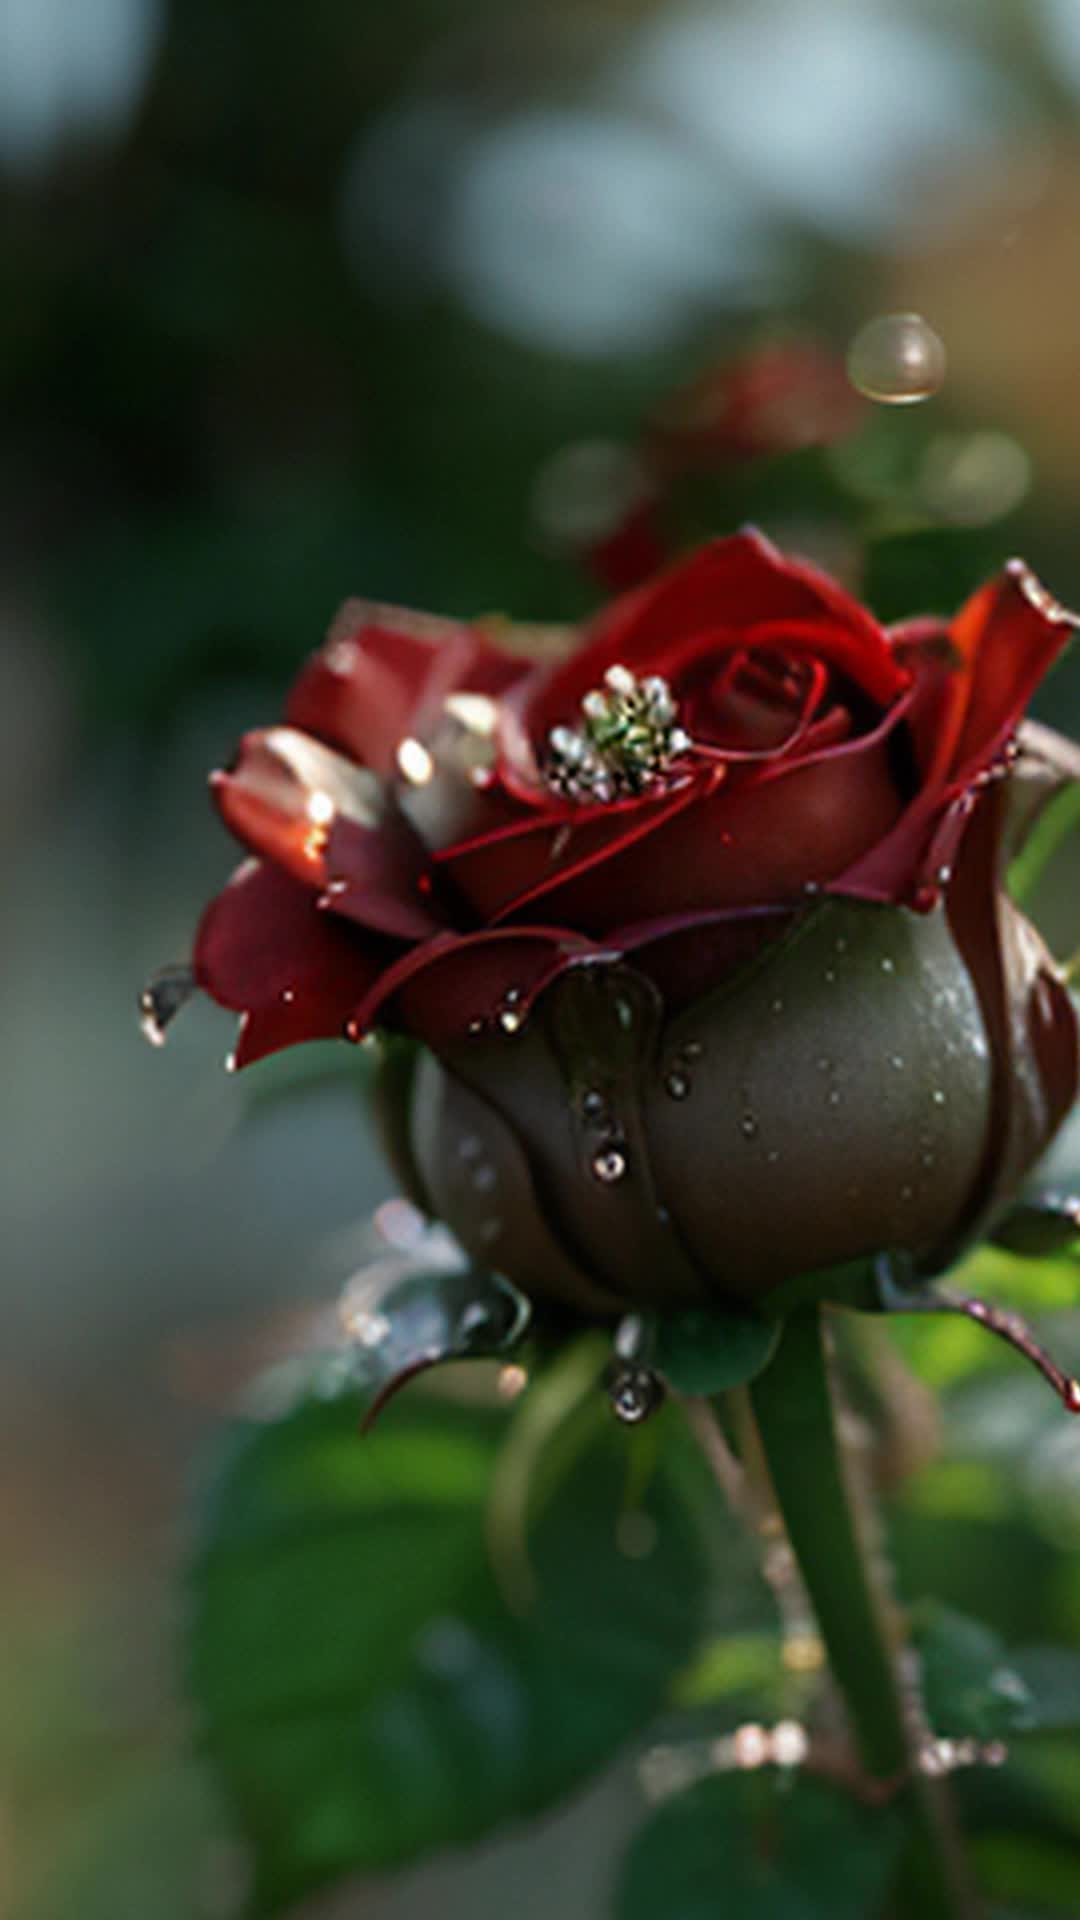 A stunning 3D visualization of dew drops slowly moving on a bouquet of red roses in the soft morning light Roses are decorated with white streaks and drops of morning dew The petals are softly blurred in the background, creating a sense of depth and movement The light morning mist adds to the serene atmosphere, while soft natural light illuminates each rose The subtle movement and high detail of the roses, combined with the sharp focus and tranquil atmosphere, create a cinematic work of art